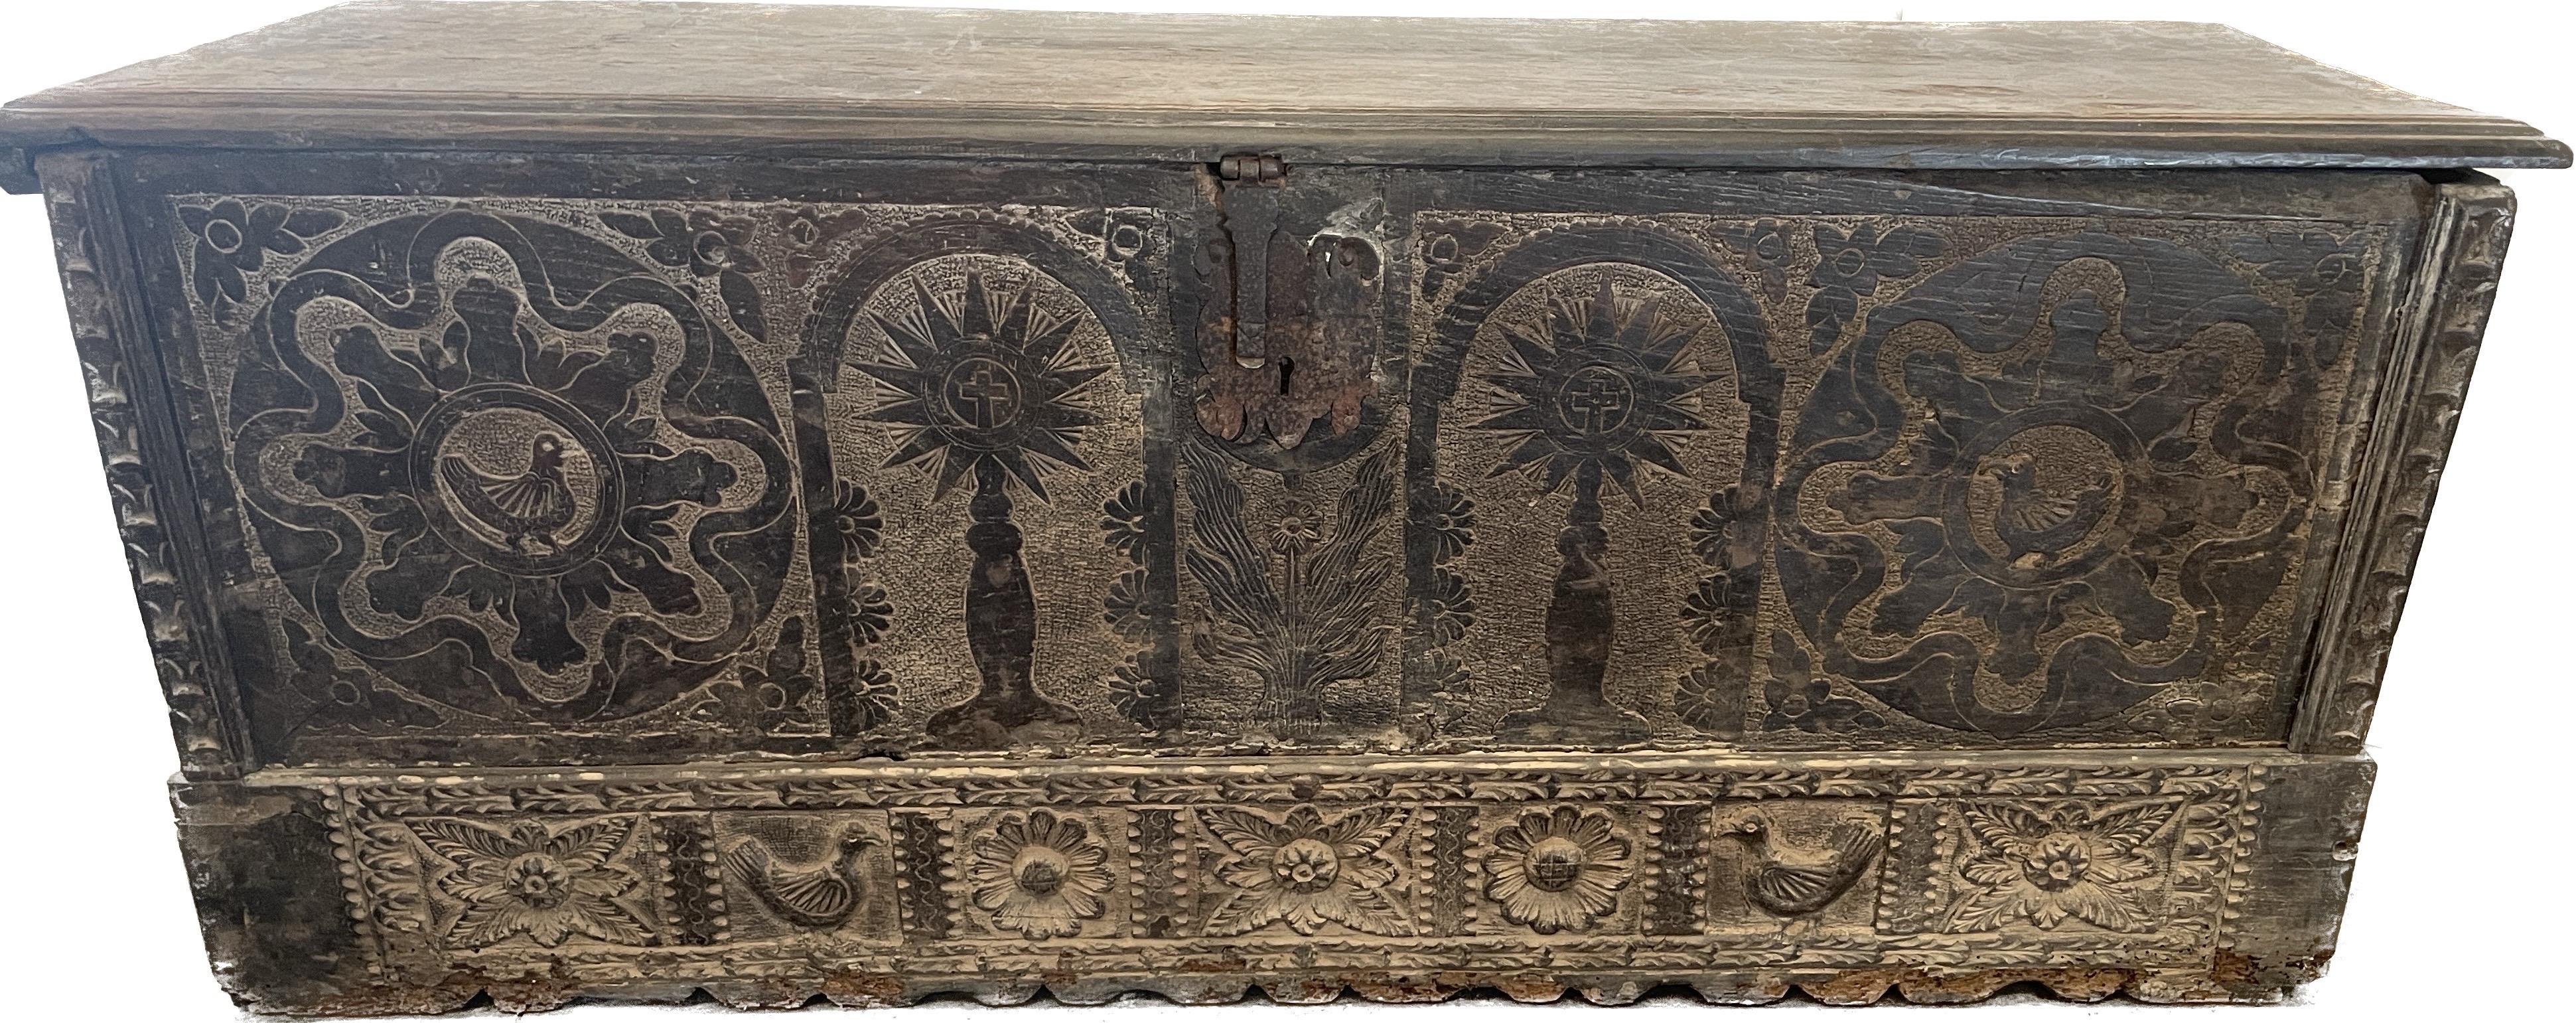 This Spanish beautifully carved walnut trunk from the 1600’s is one of the most handsome I’ve come across in the last ten years.  It’s perfect for the end of a hall with a beautiful mirror or painting above or used as a coffee table. In fact there